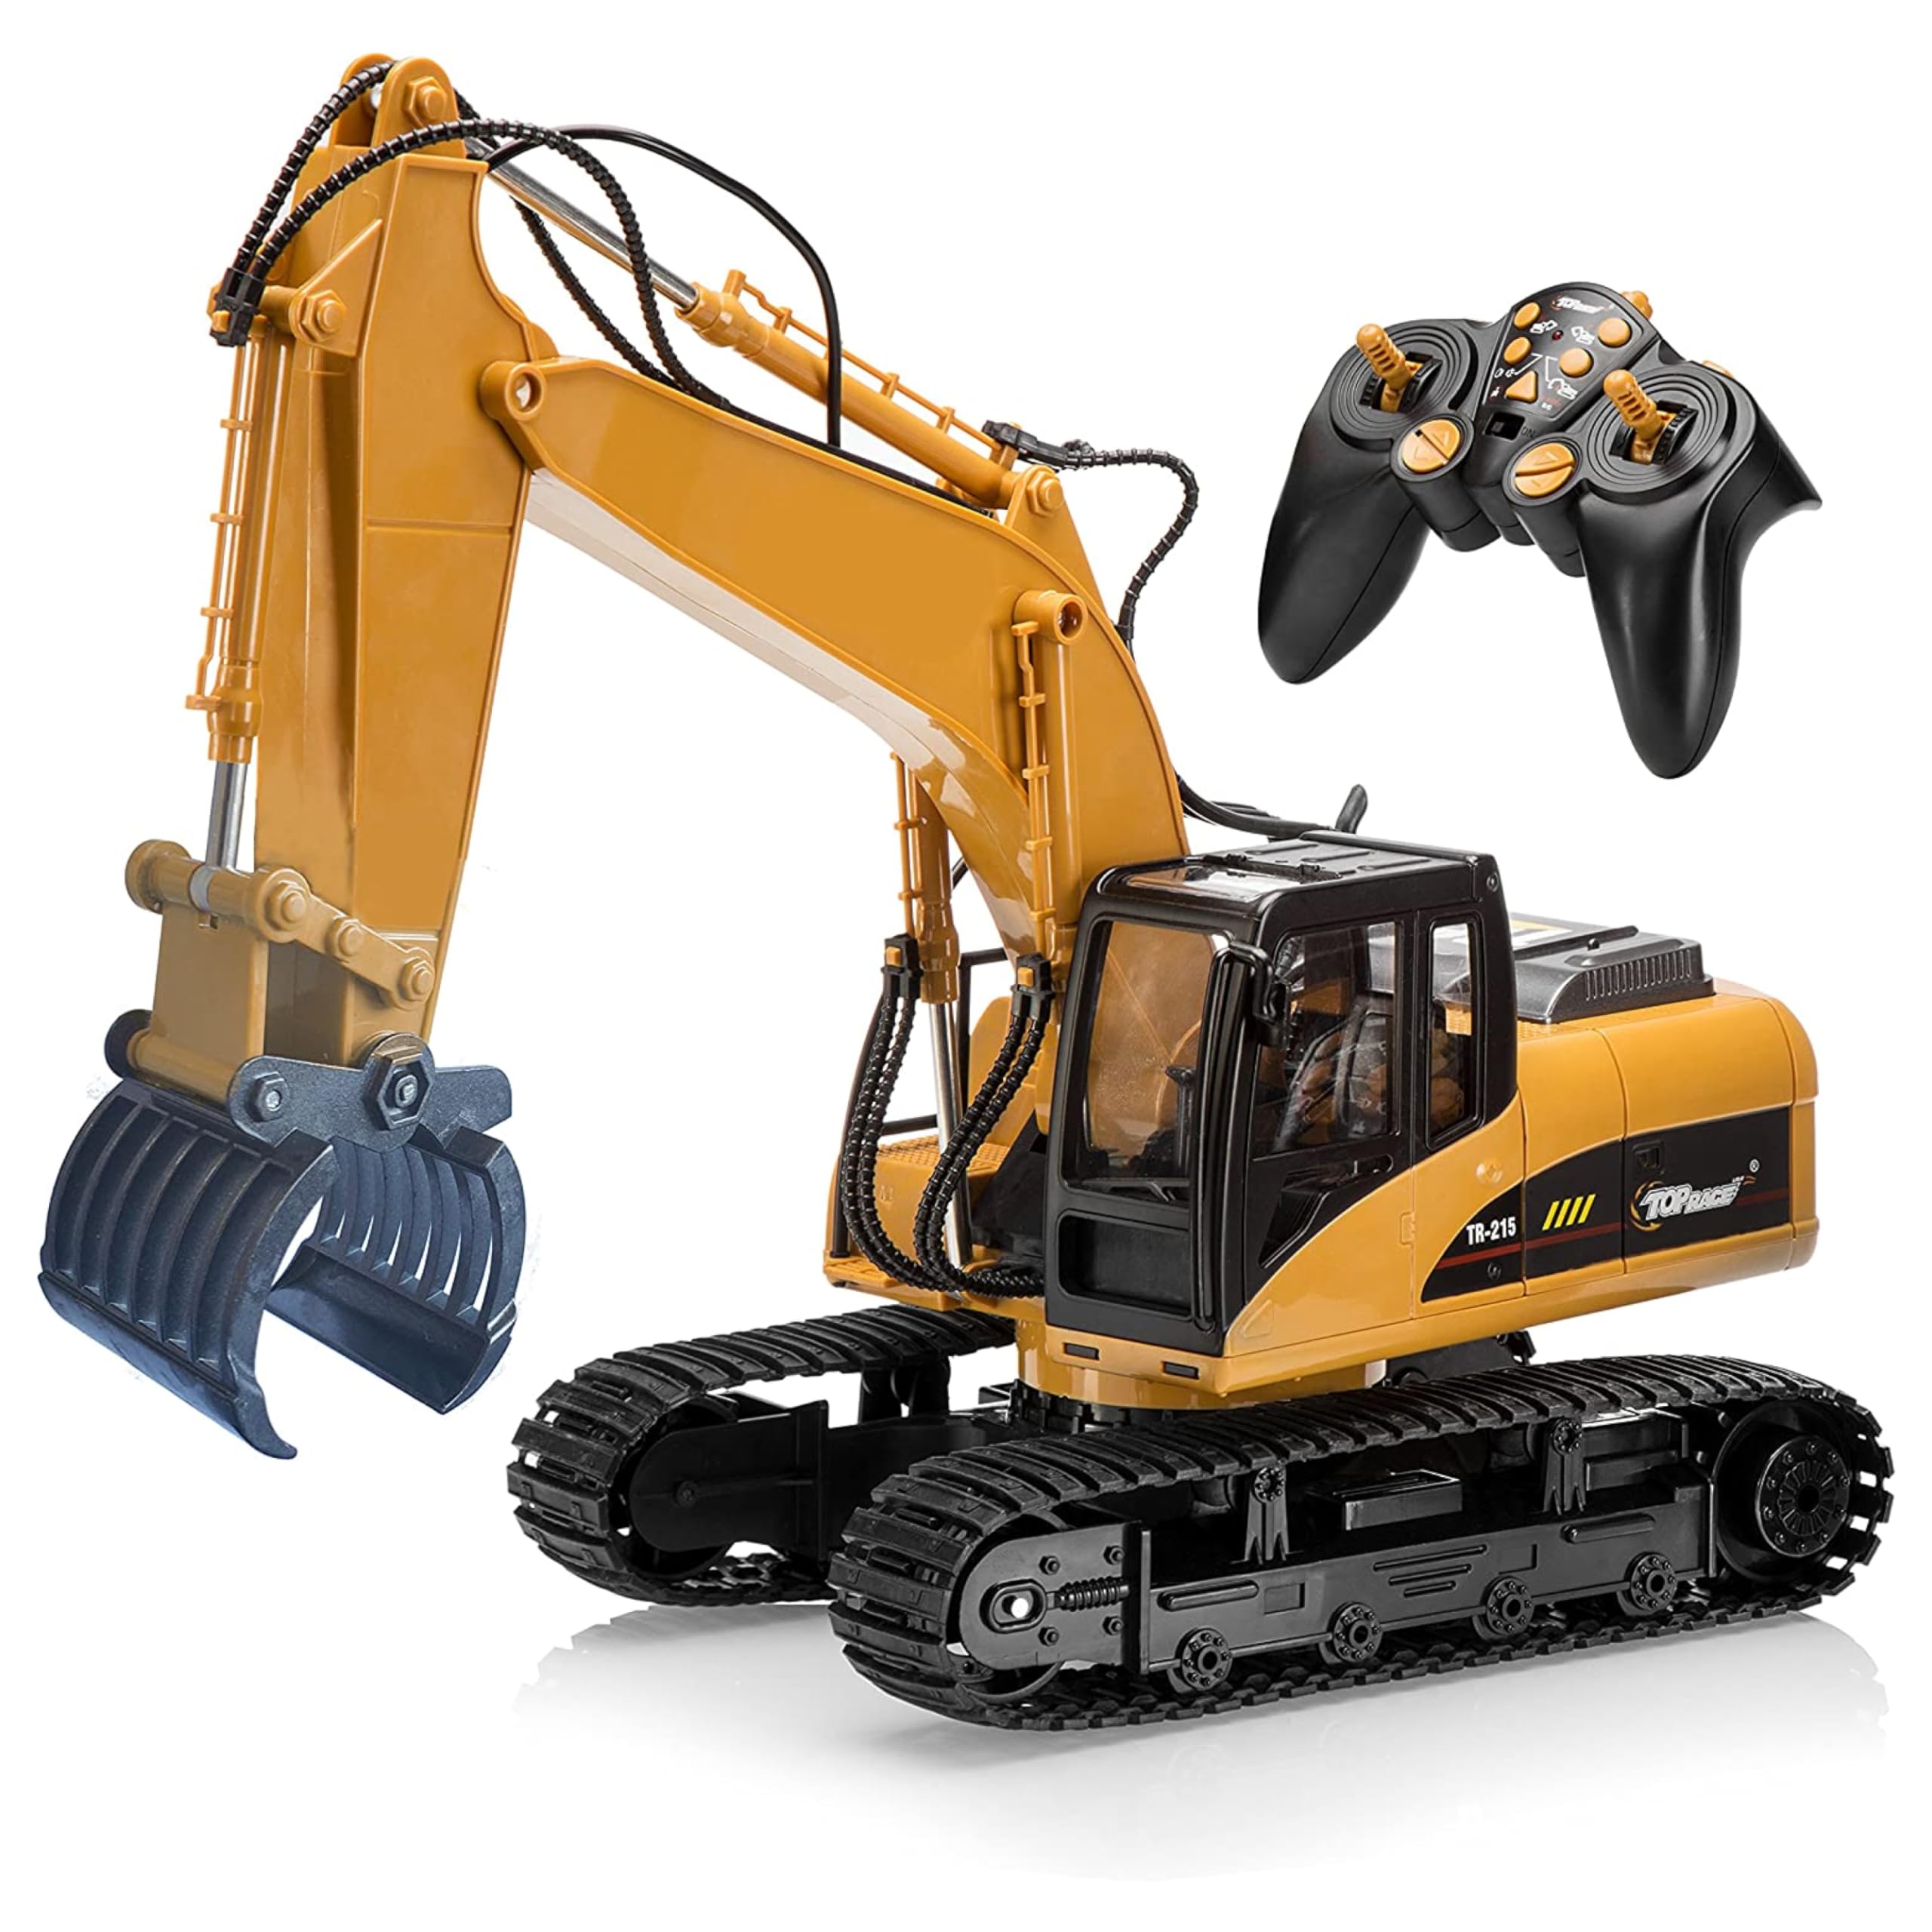 Top Race 15 Channel Full Functional Remote Control Excavator Construction Tractor, Excavator Toy with 2.4Ghz Transmitter and Metal Shovel